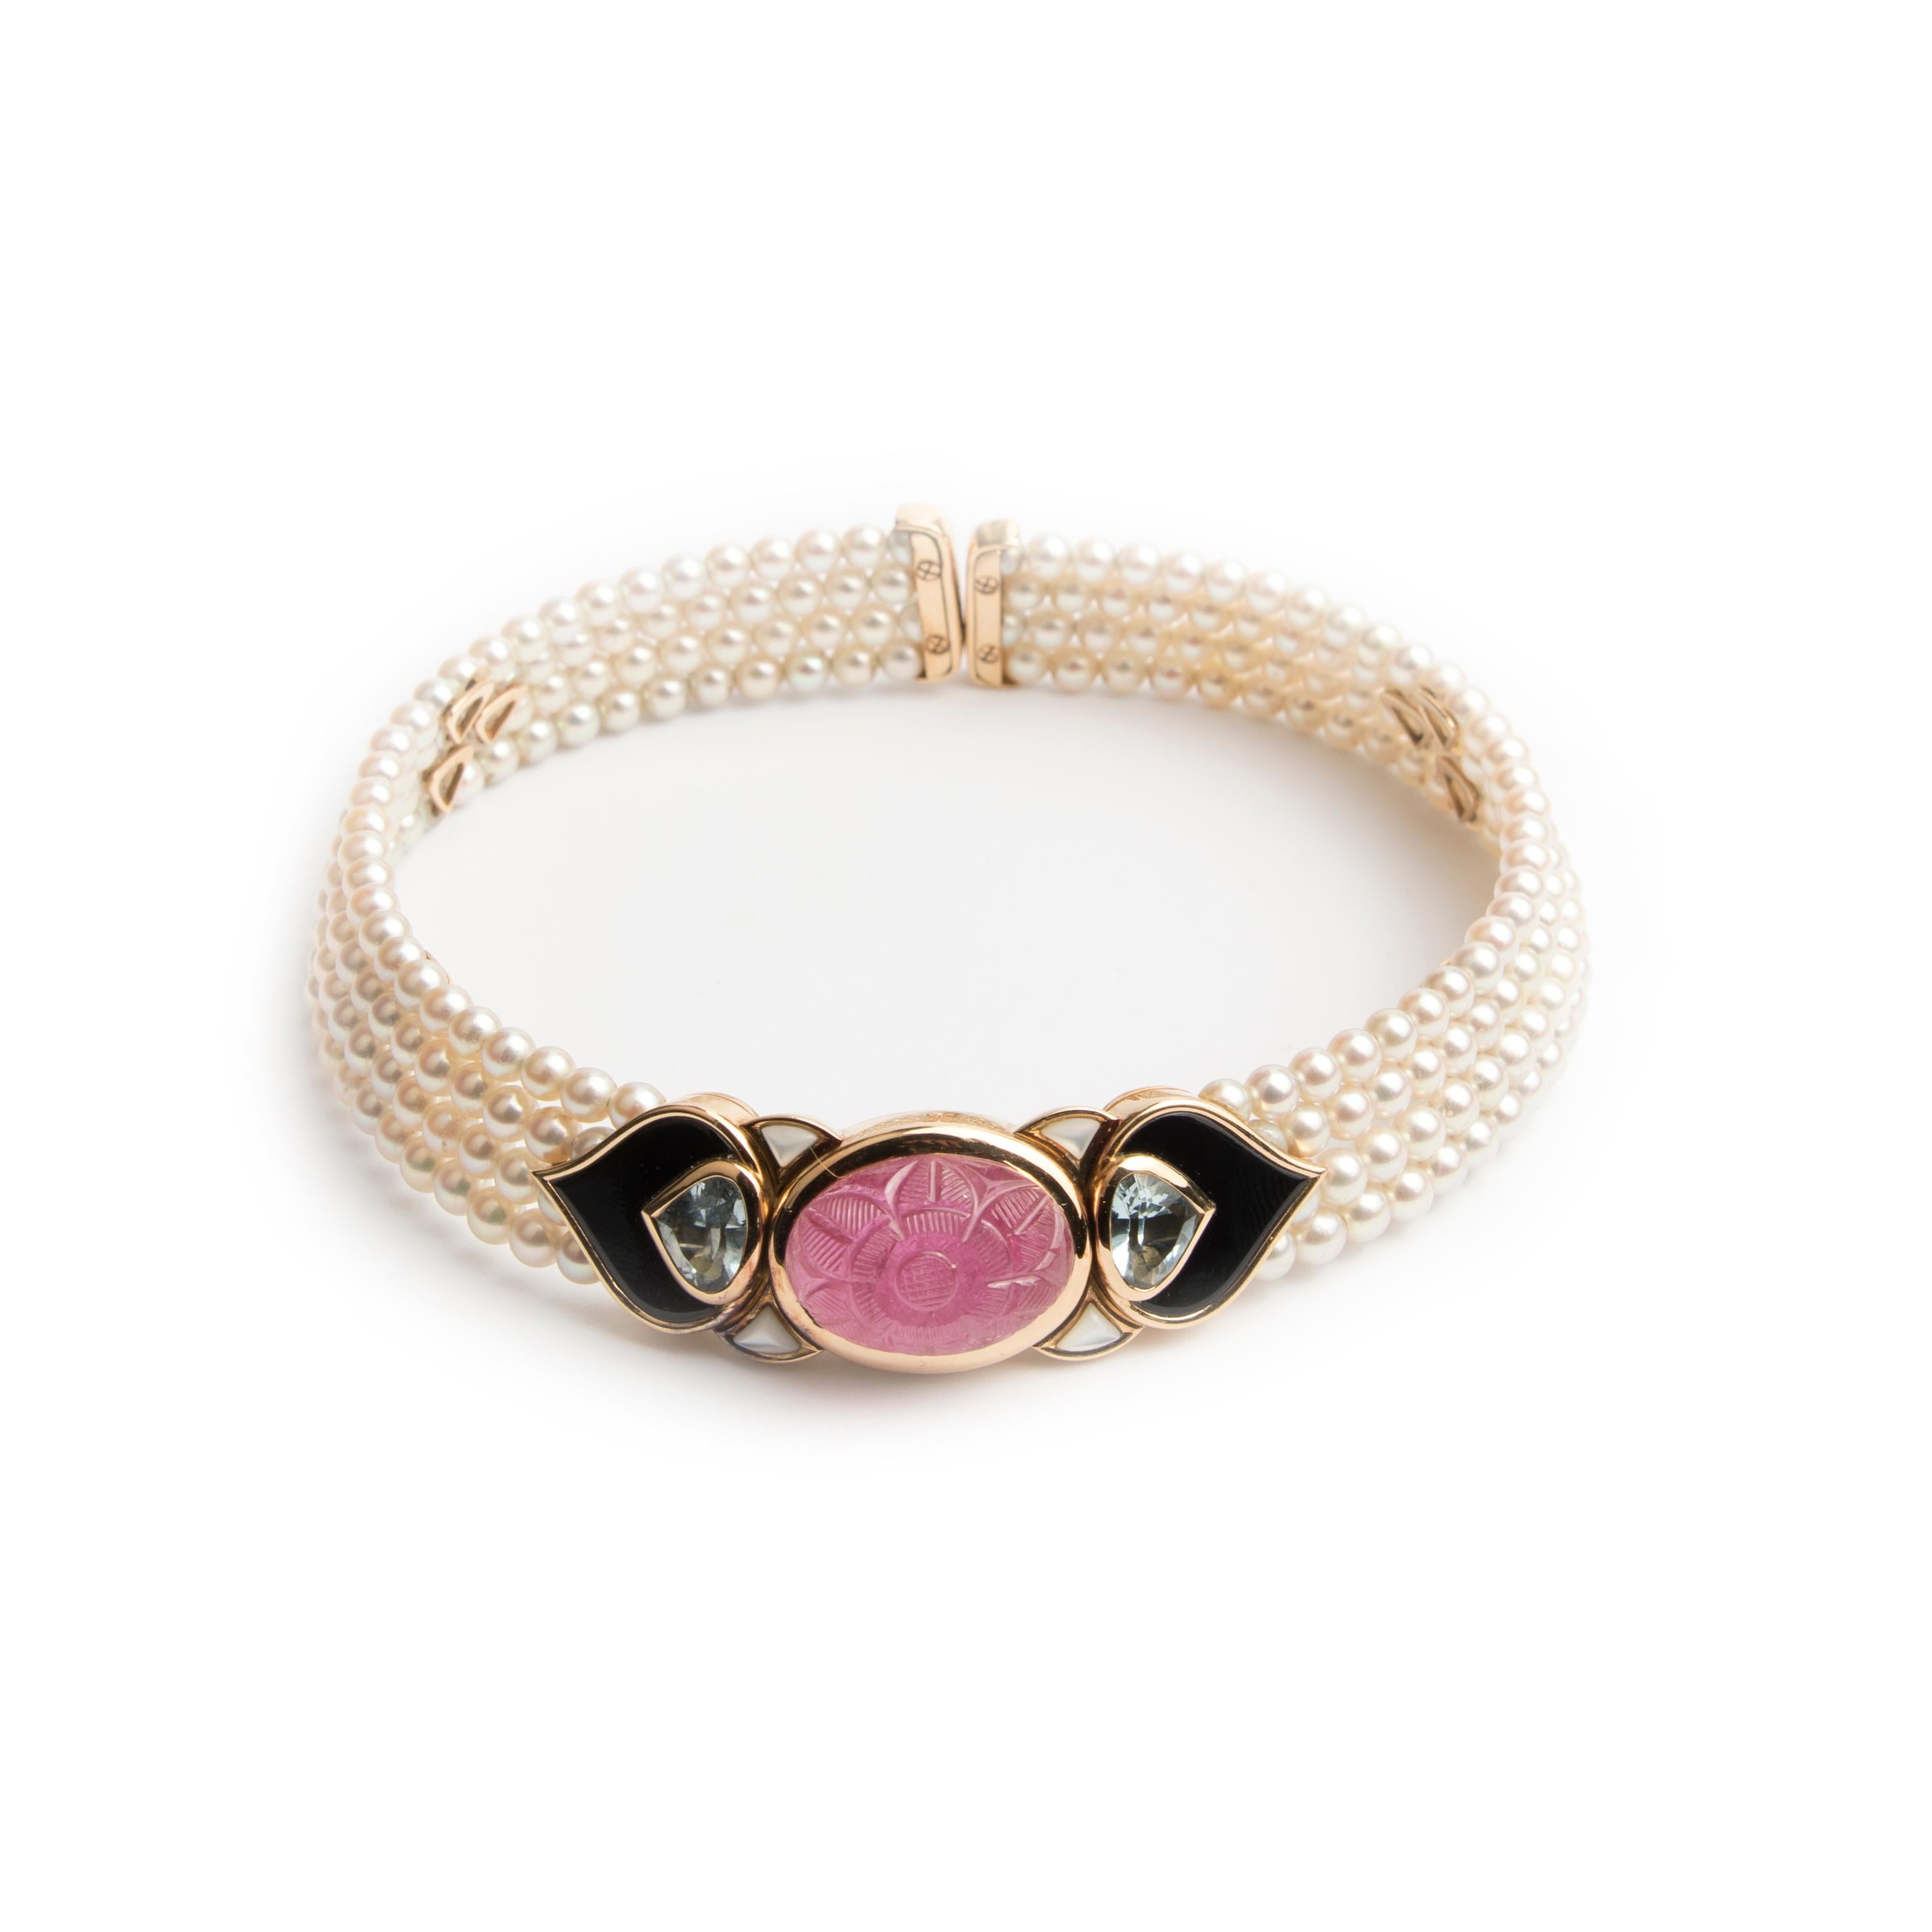 Marina B choker necklace 'Pauline', made of four strands of cultured pearls (4-4.5 mm) on springs, centred by a 18k yellow gold motive, set with an oval pink tourmaline engraved with floral decor, mother of pearl, onyx and aquamarine. 
Signed Marina